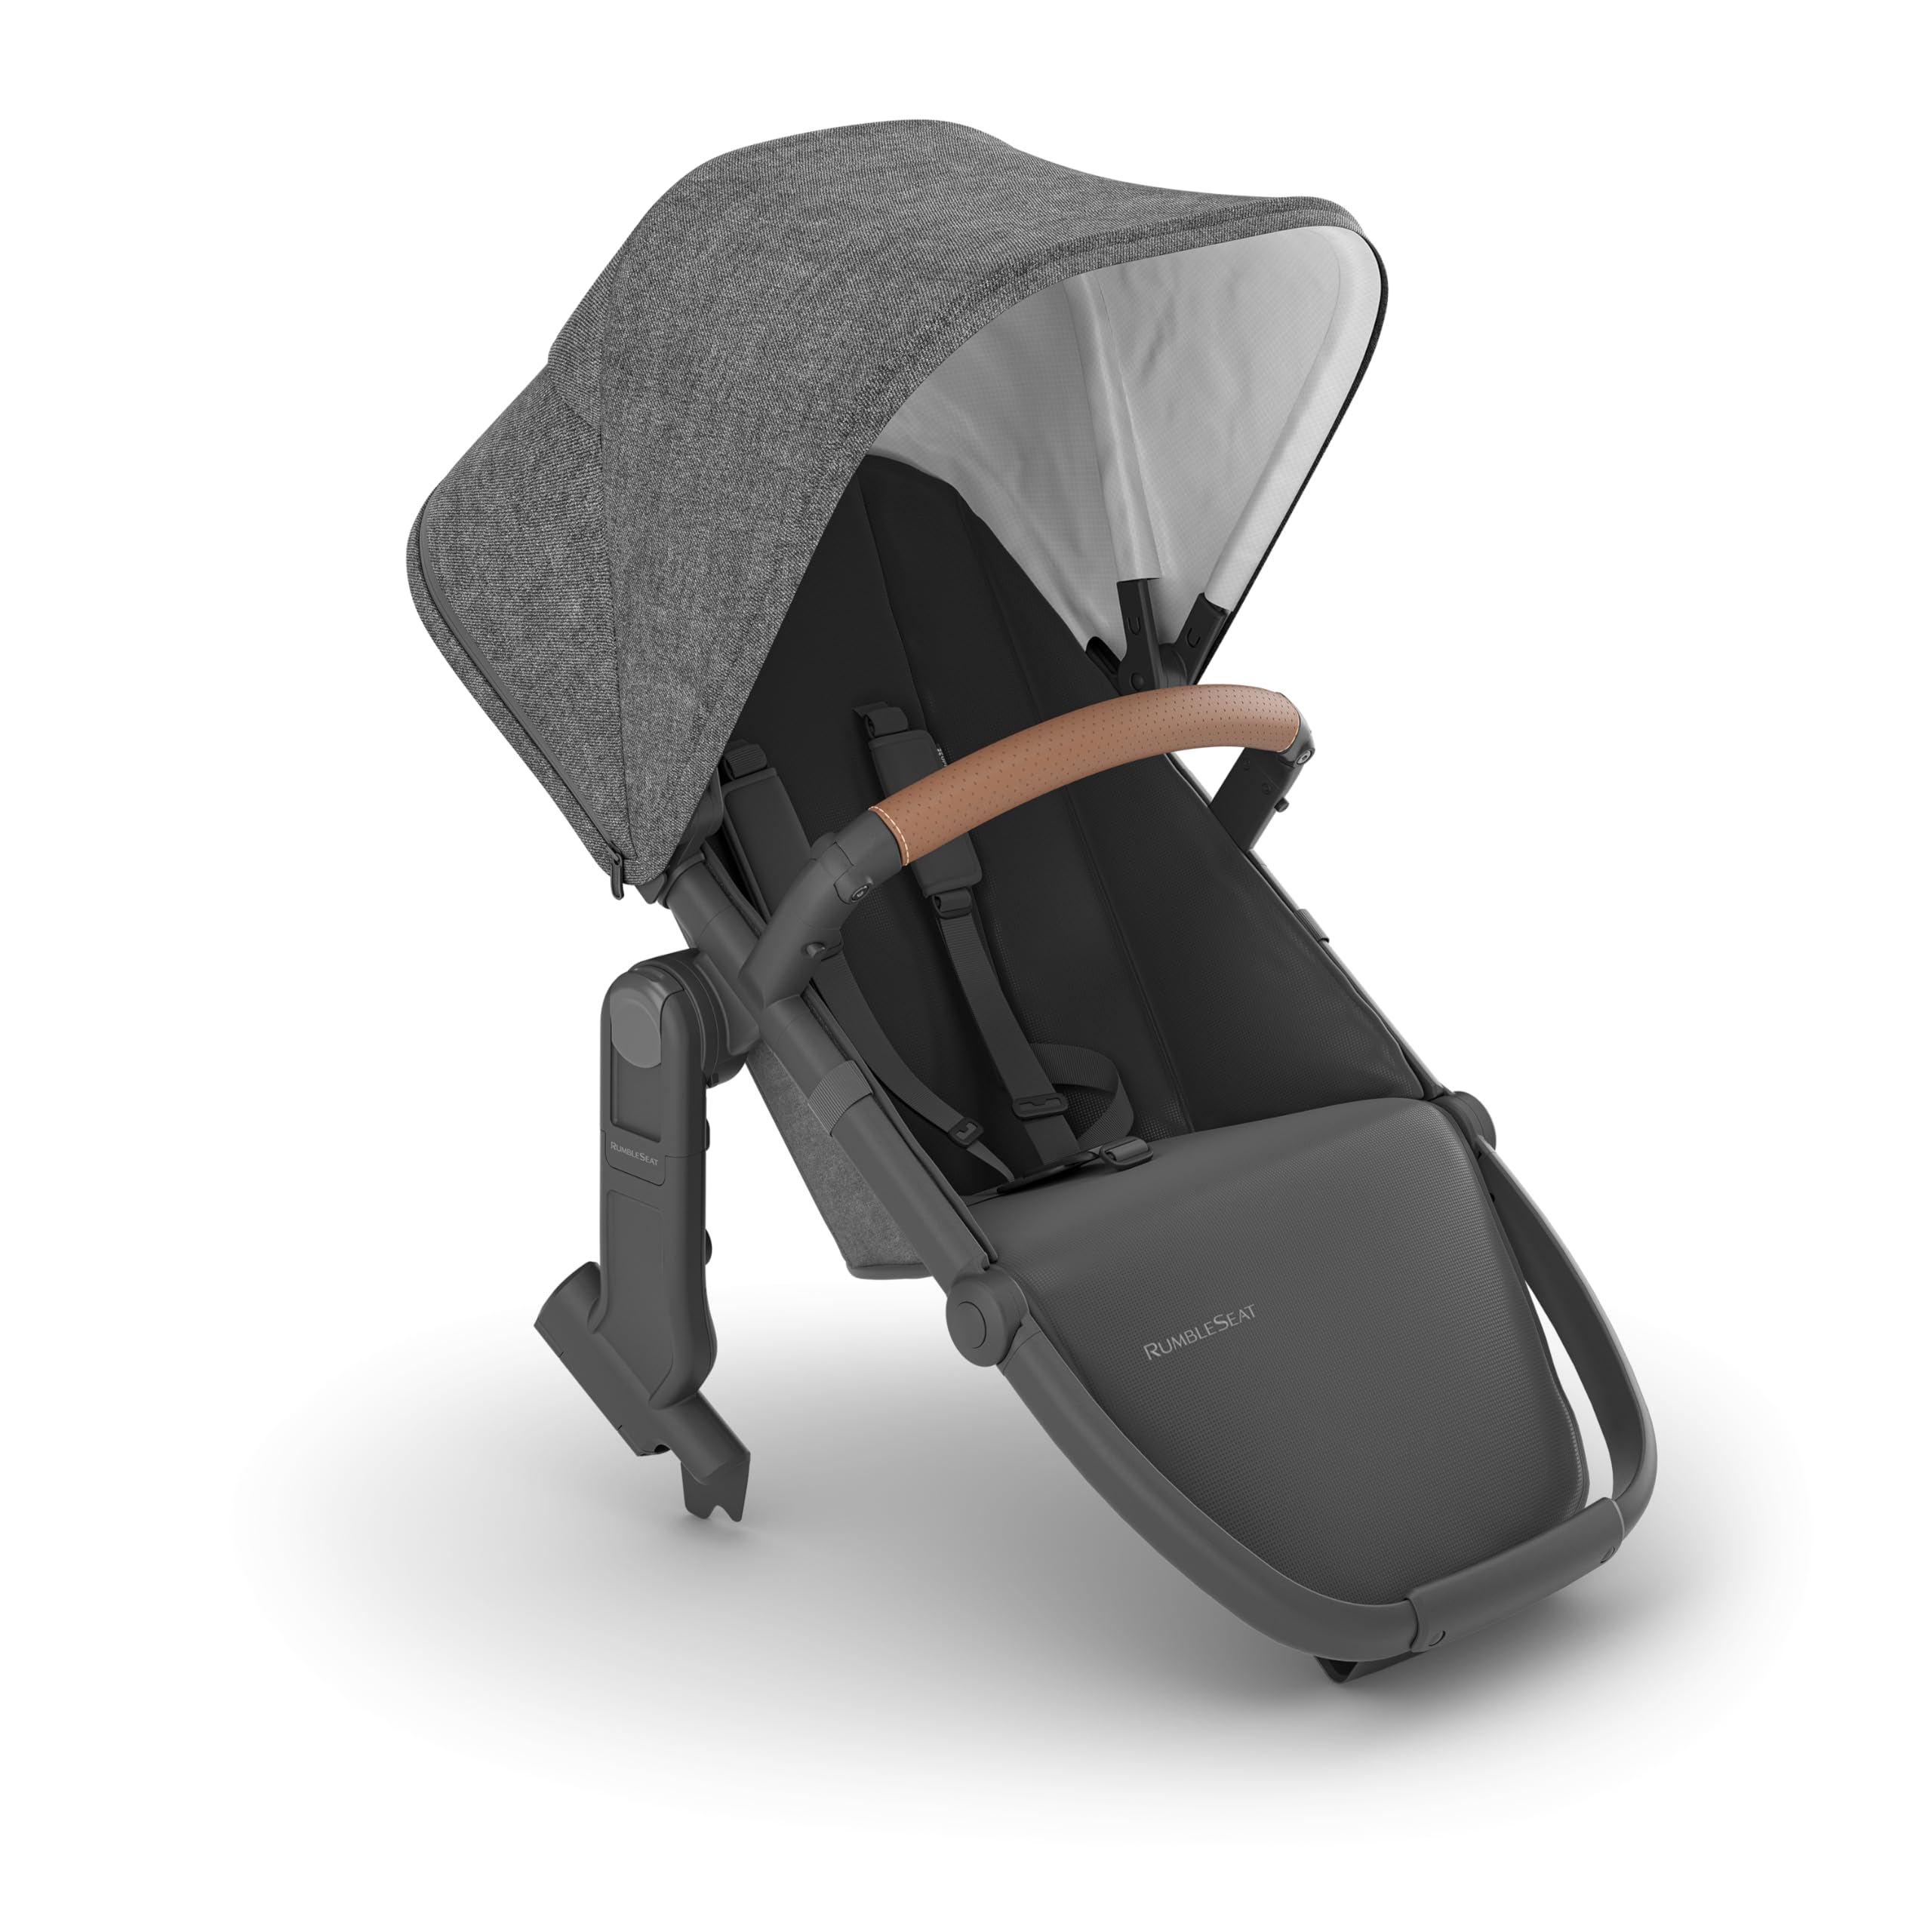 UPPAbaby RumbleSeat V2+ / Second Seat Accessory for Vista V2 Stroller/Includes Adapters/Greyson (Charcoal Mélange/Carbon Frame/Saddle Leather)